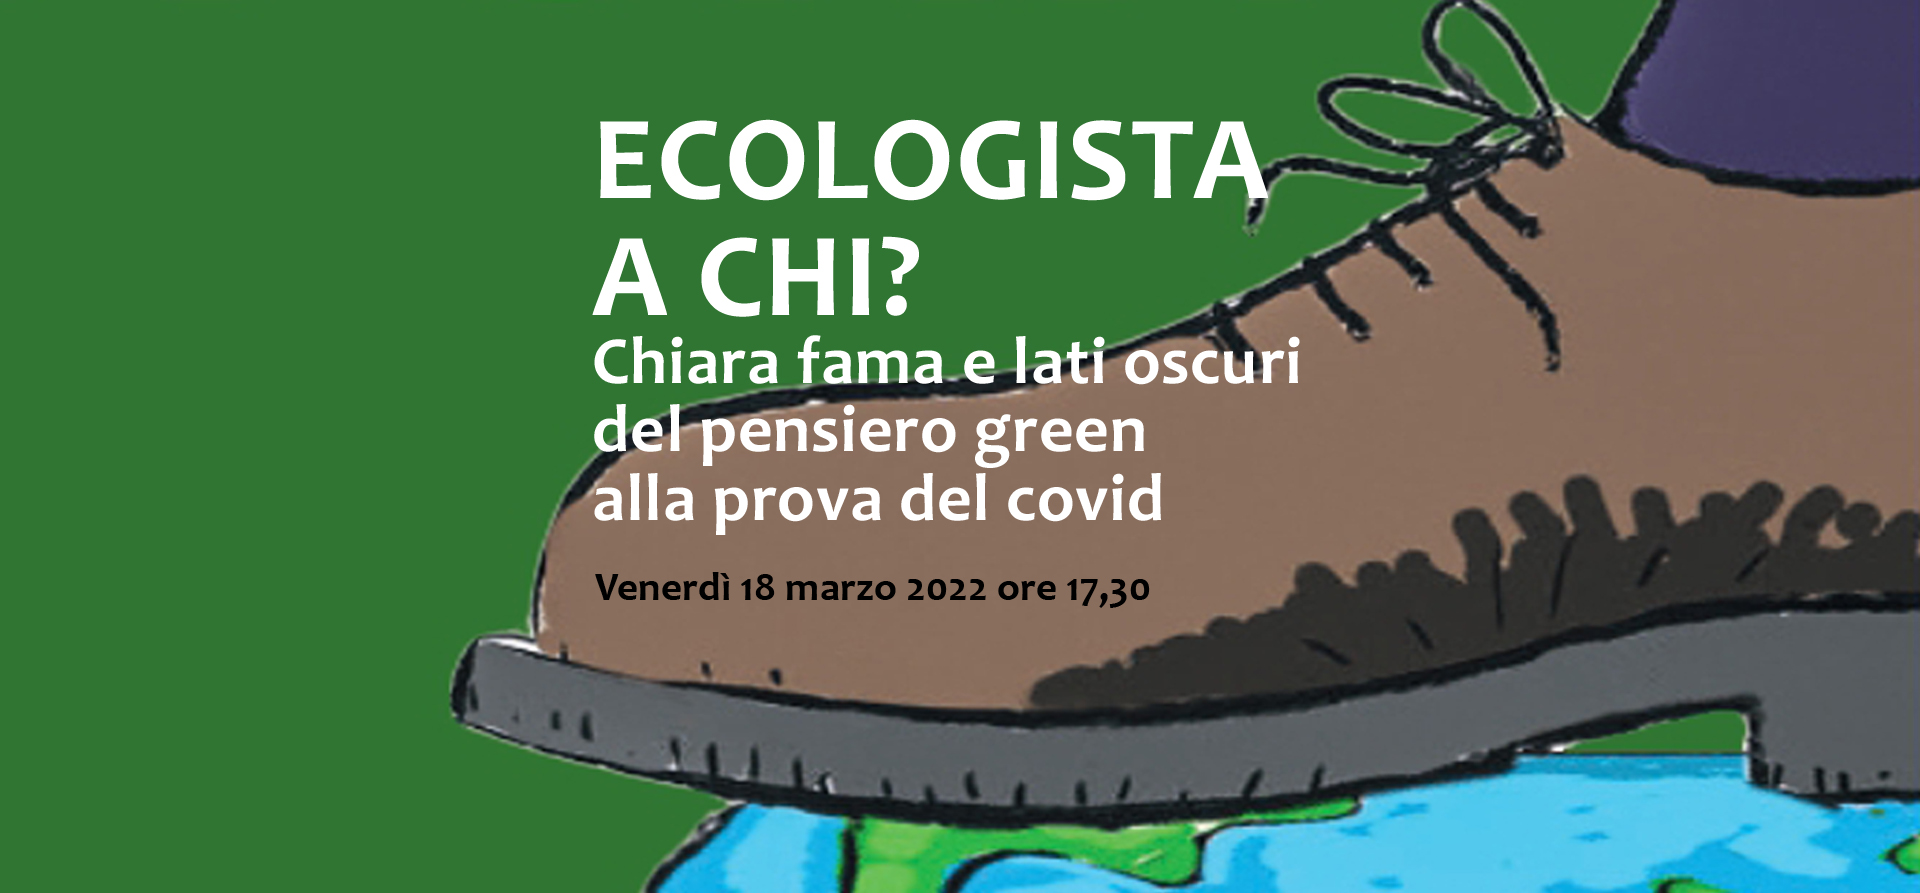 ECOLOGISTA A CHI?